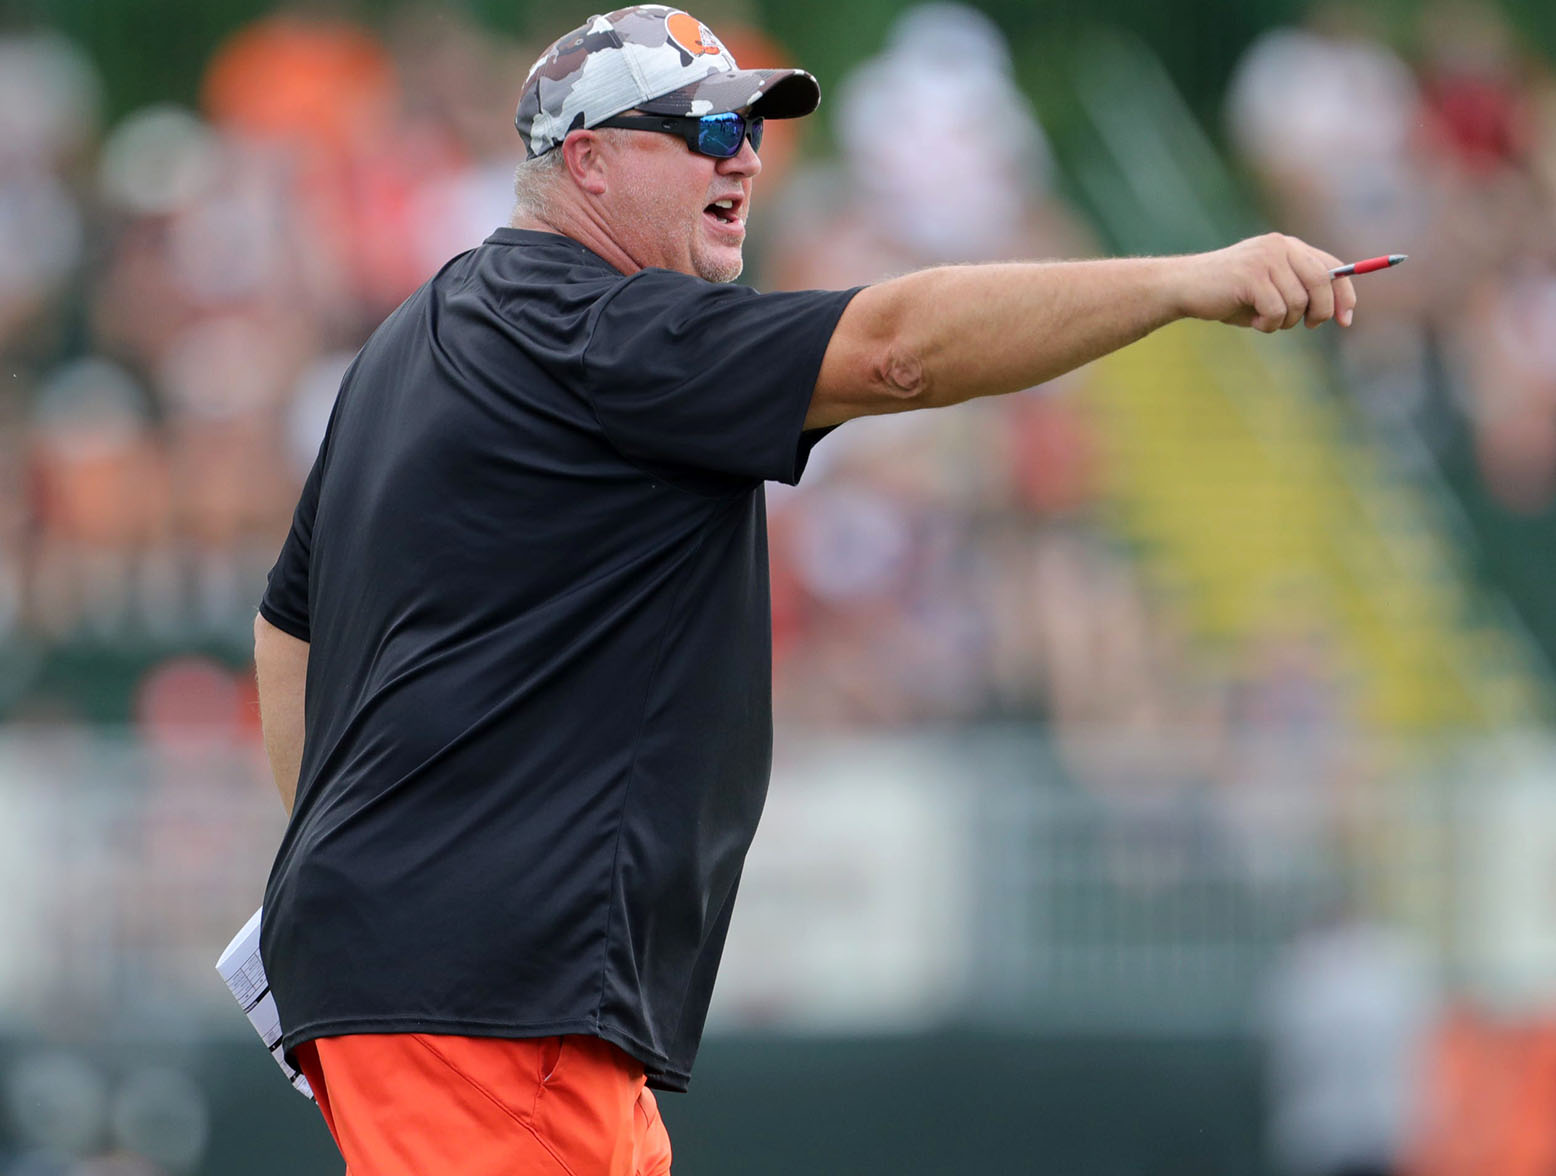 Browns offensive coordinator Alex Van Pelt directs the offense during training camp, Aug. 5, 2022 in Berea. (Syndication: Akron Beacon Journal)